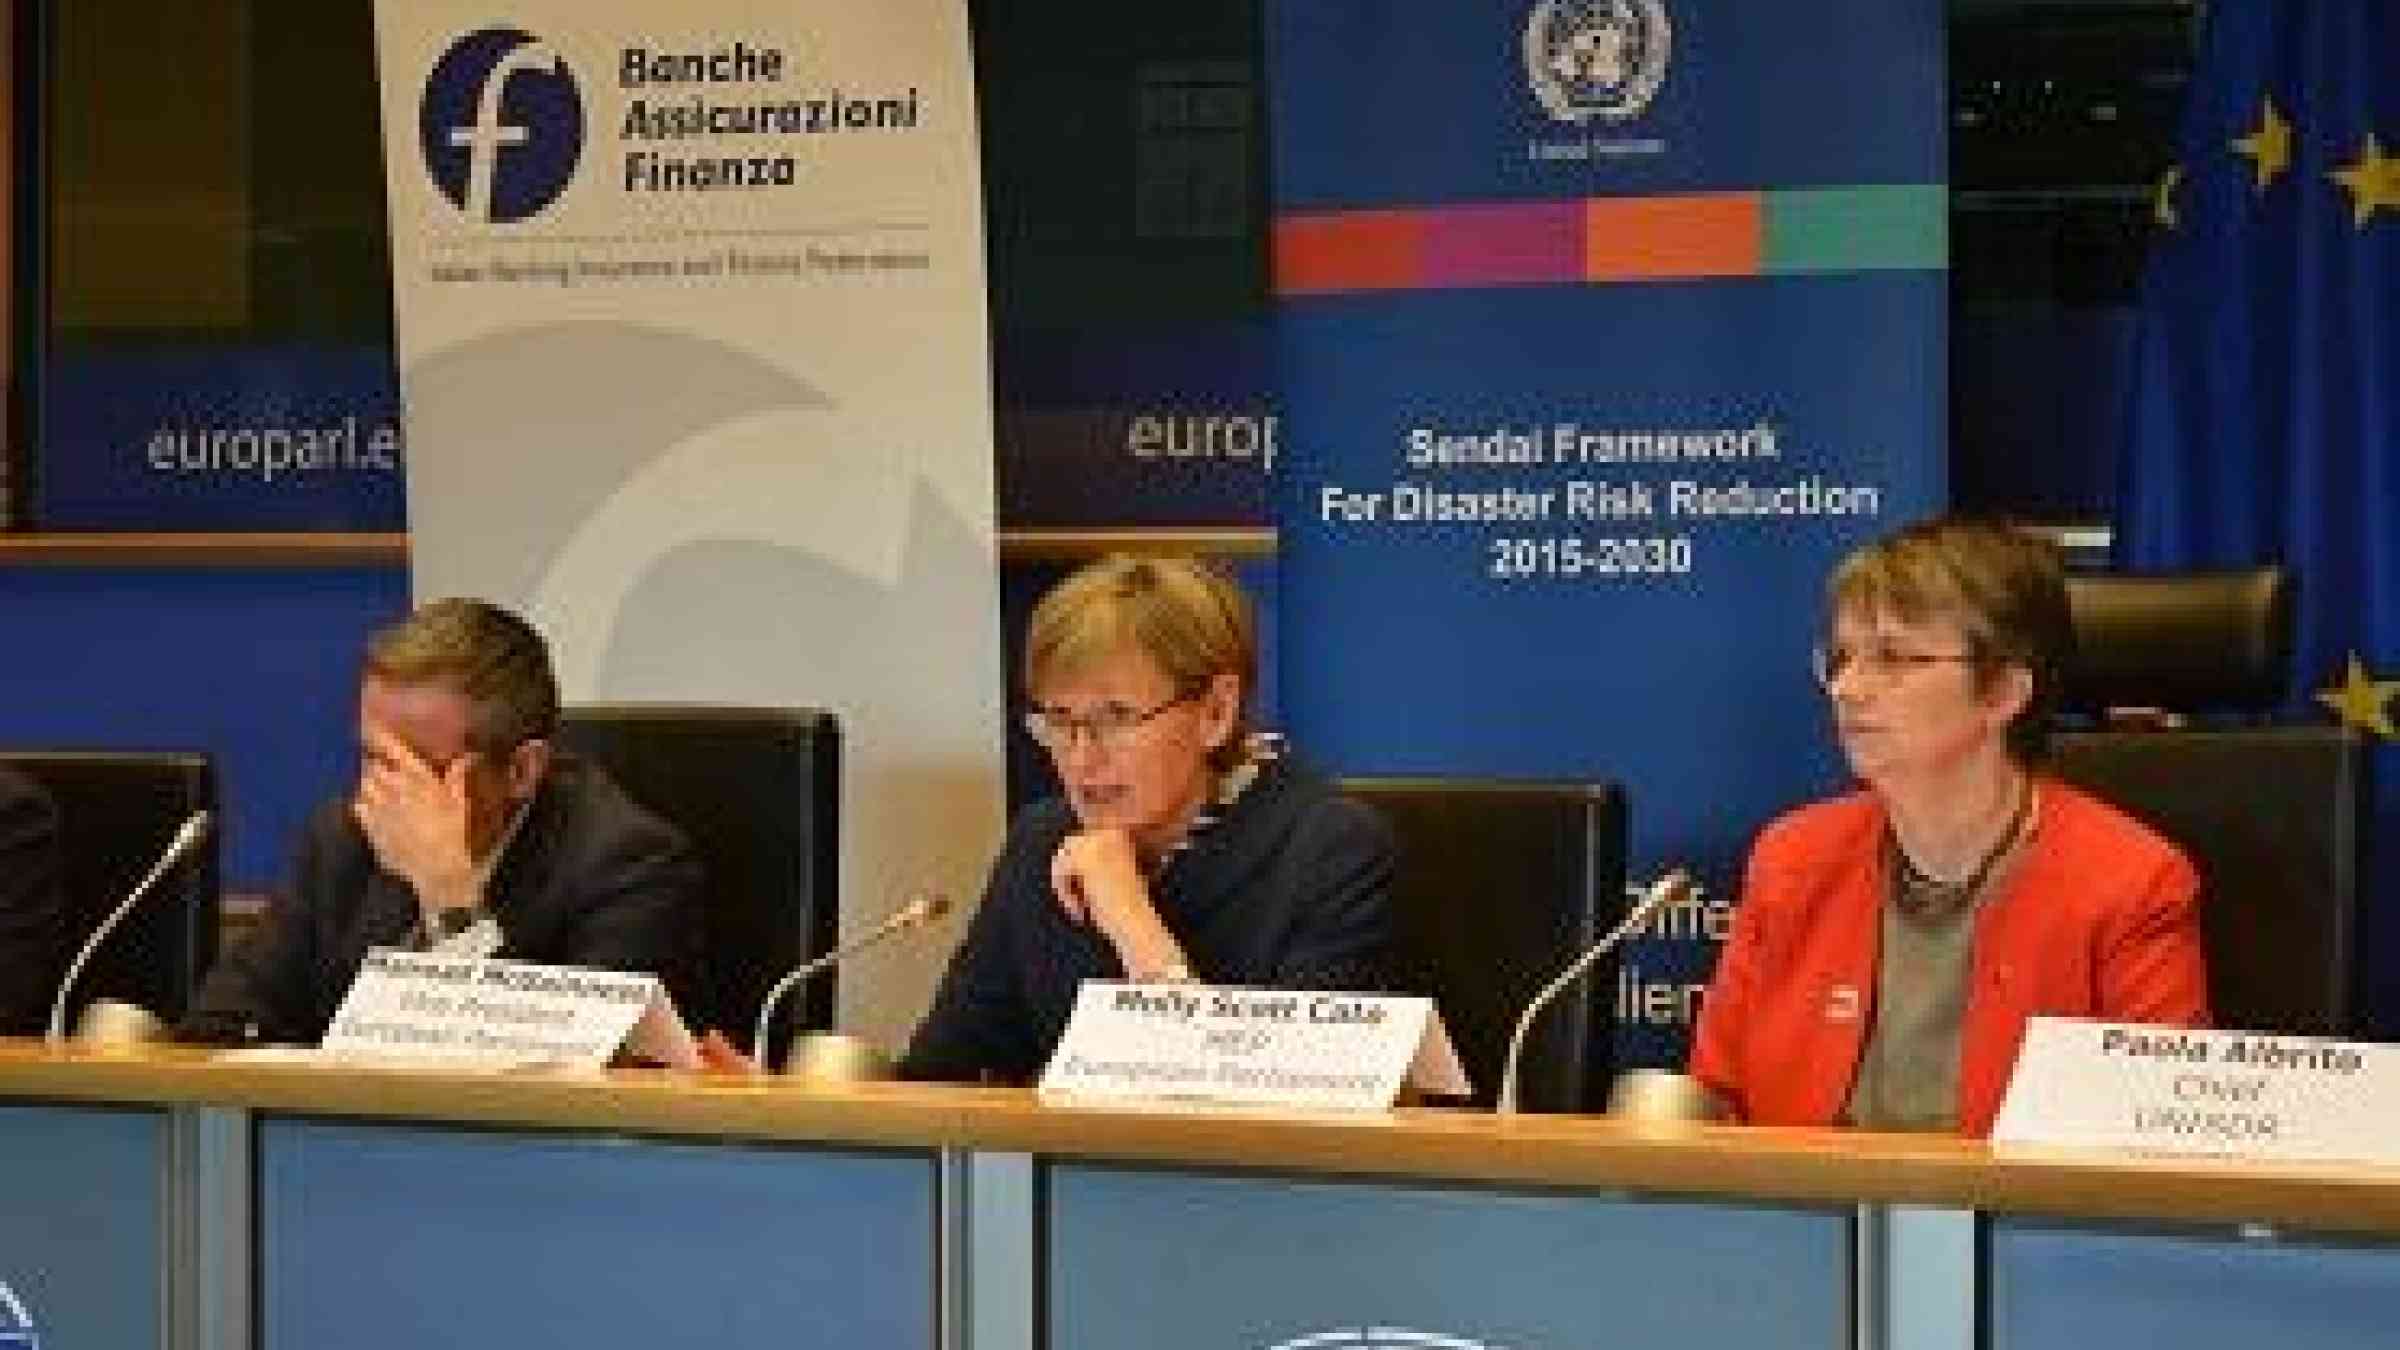 Mairead McGuinness, Vice-President of the European Parliament, speaking on resilience to disasters and sustainable finance